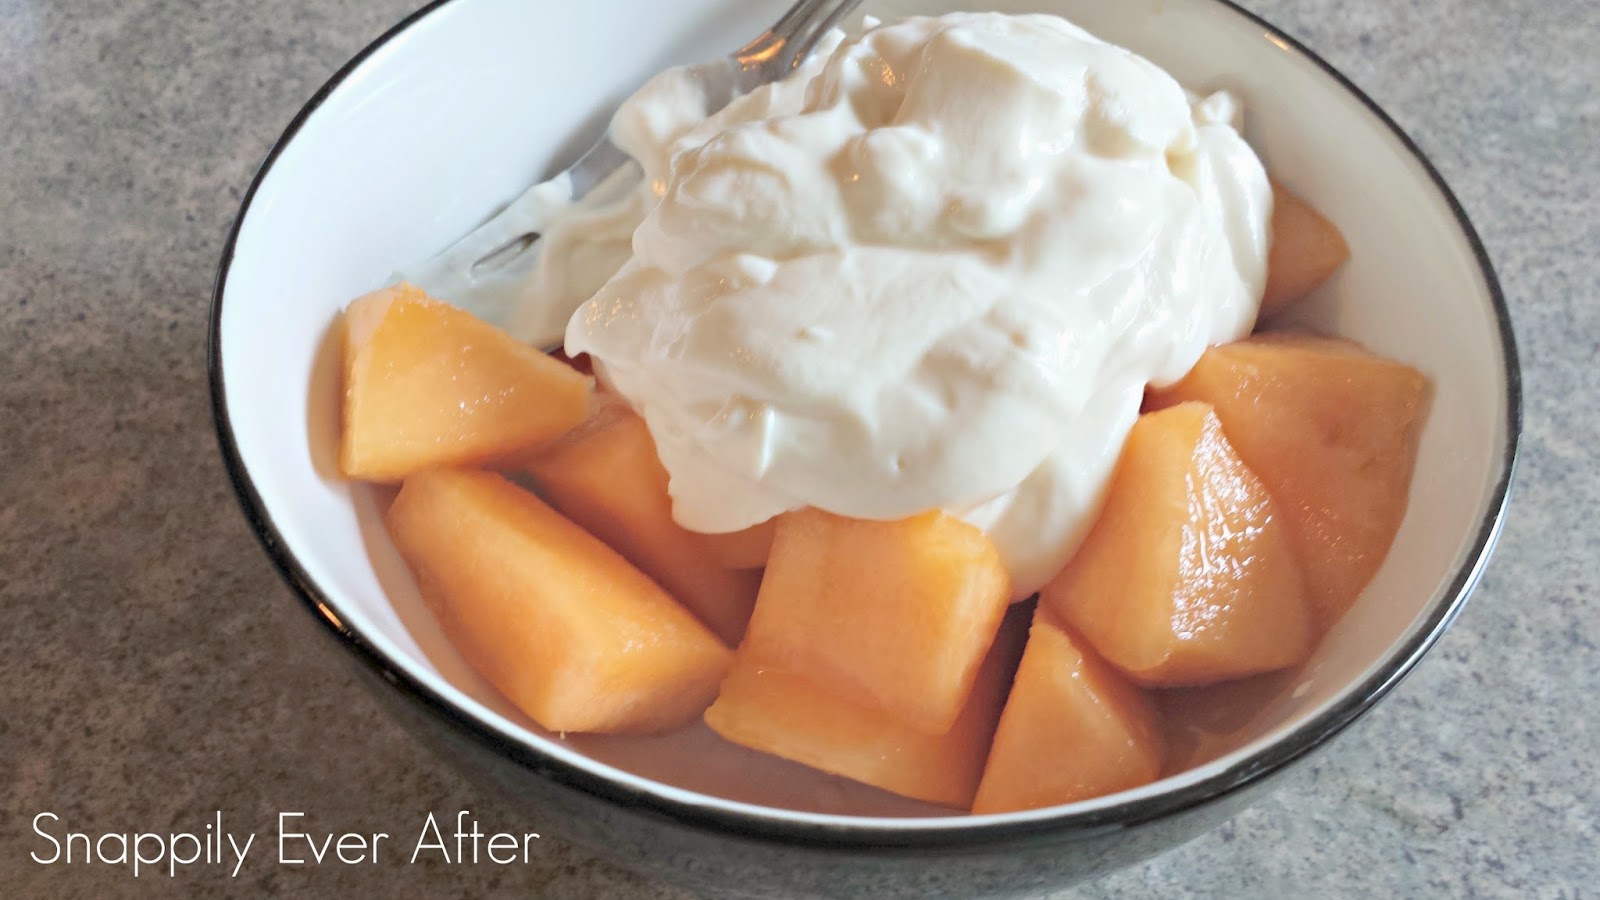 Snappily Ever After: Cantaloupe with Creamy Yogurt